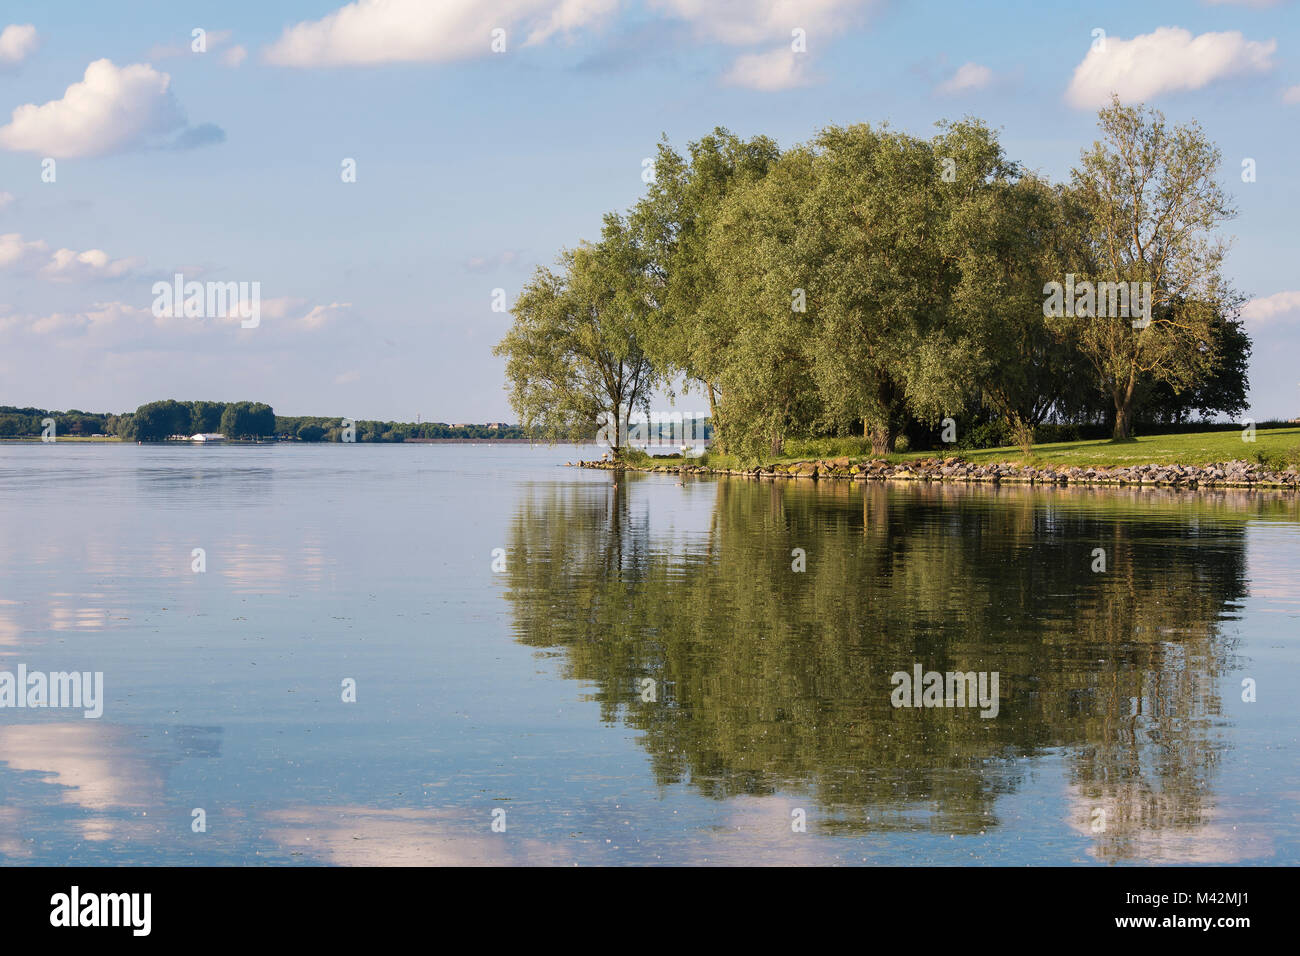 An image of a group of trees on the south shore of Rutland Water, Rutland, England, UK Stock Photo